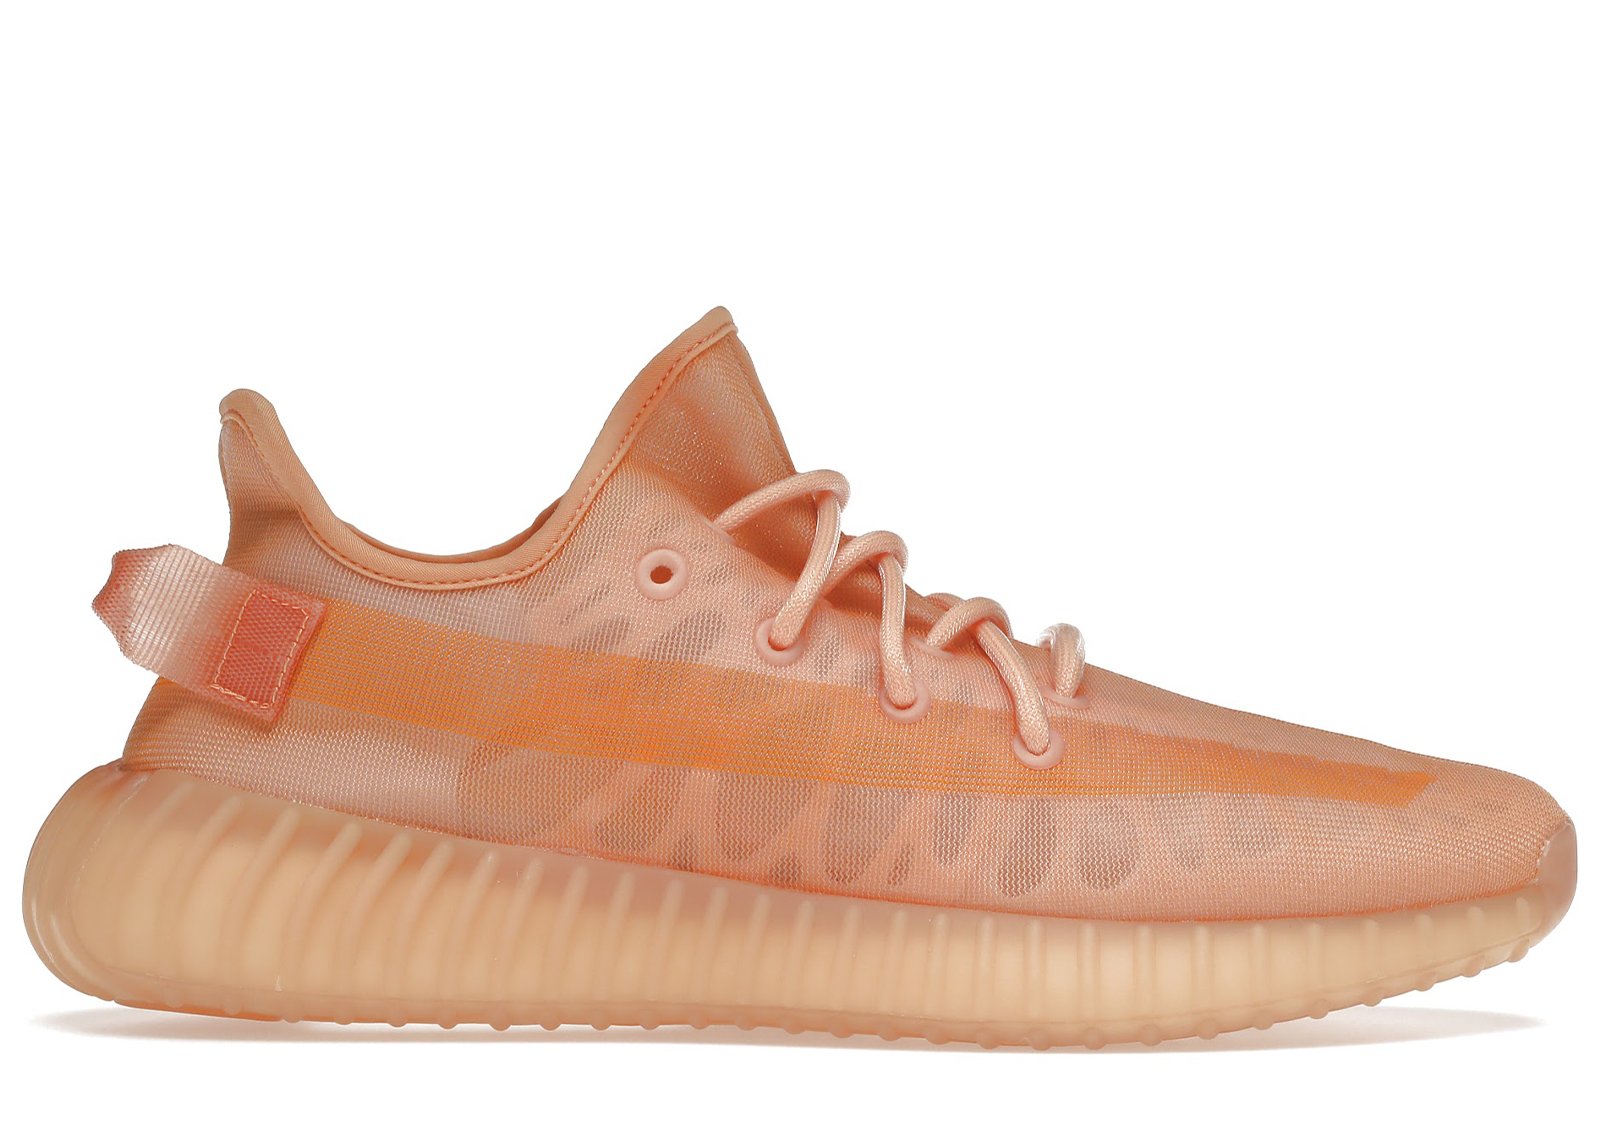 adidas Yeezy Boost 350 V2 Mono Clay sneakers